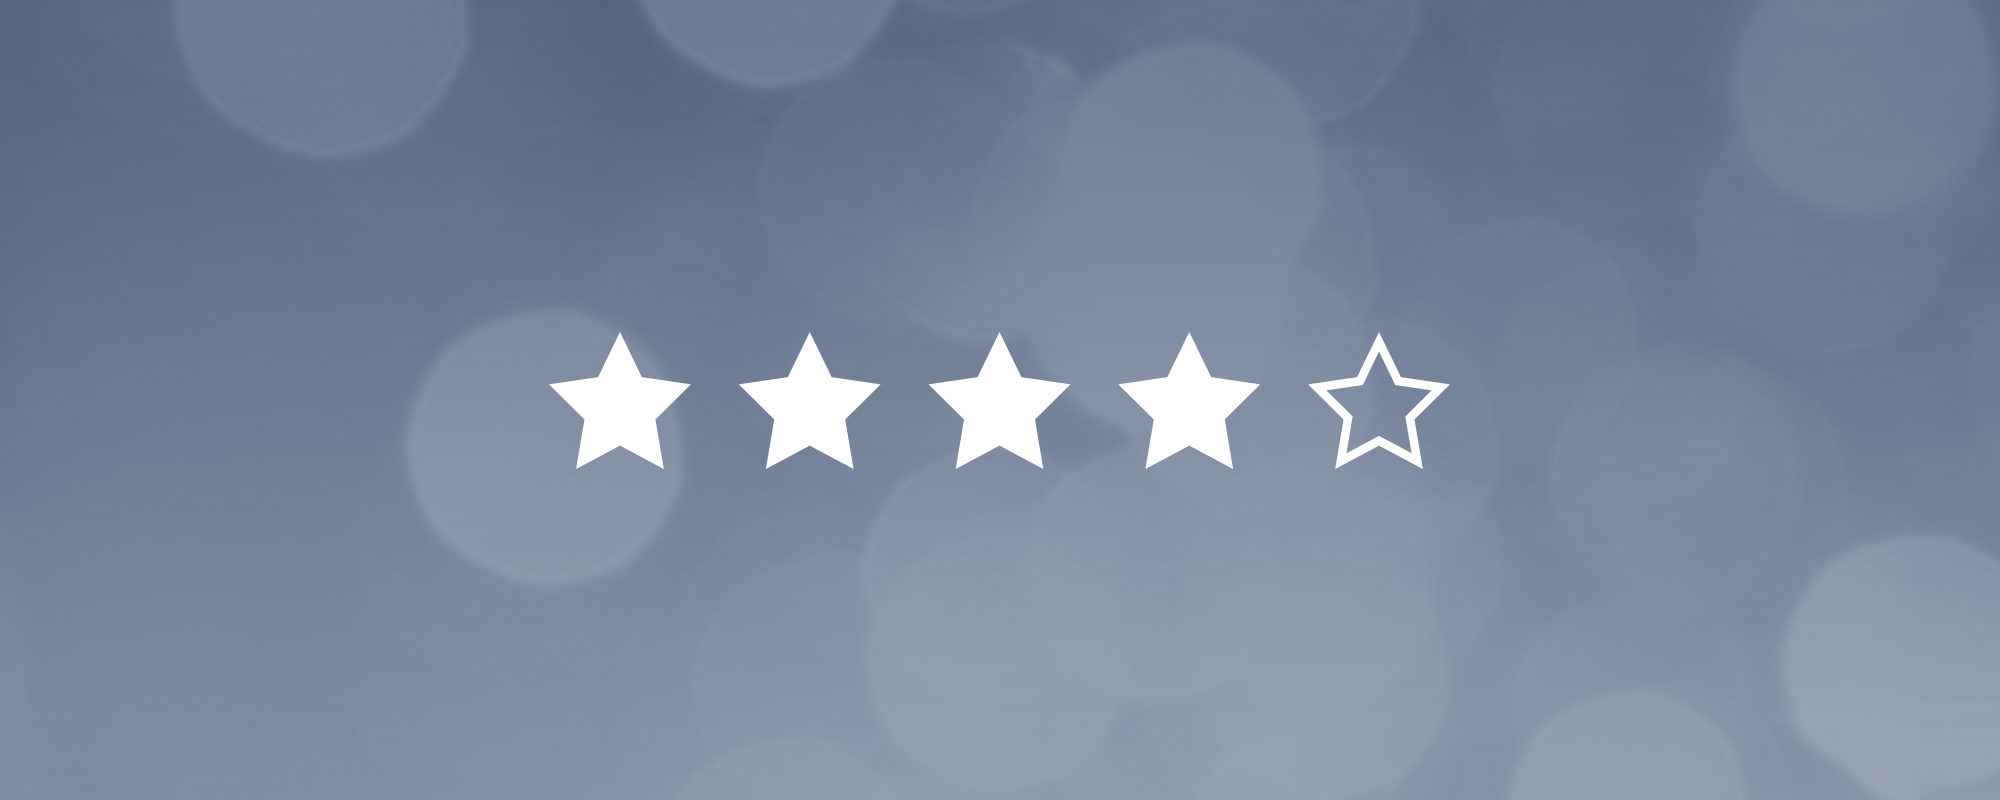 Four stars with solid fill and a fifth open star, meant to show a four-star rating